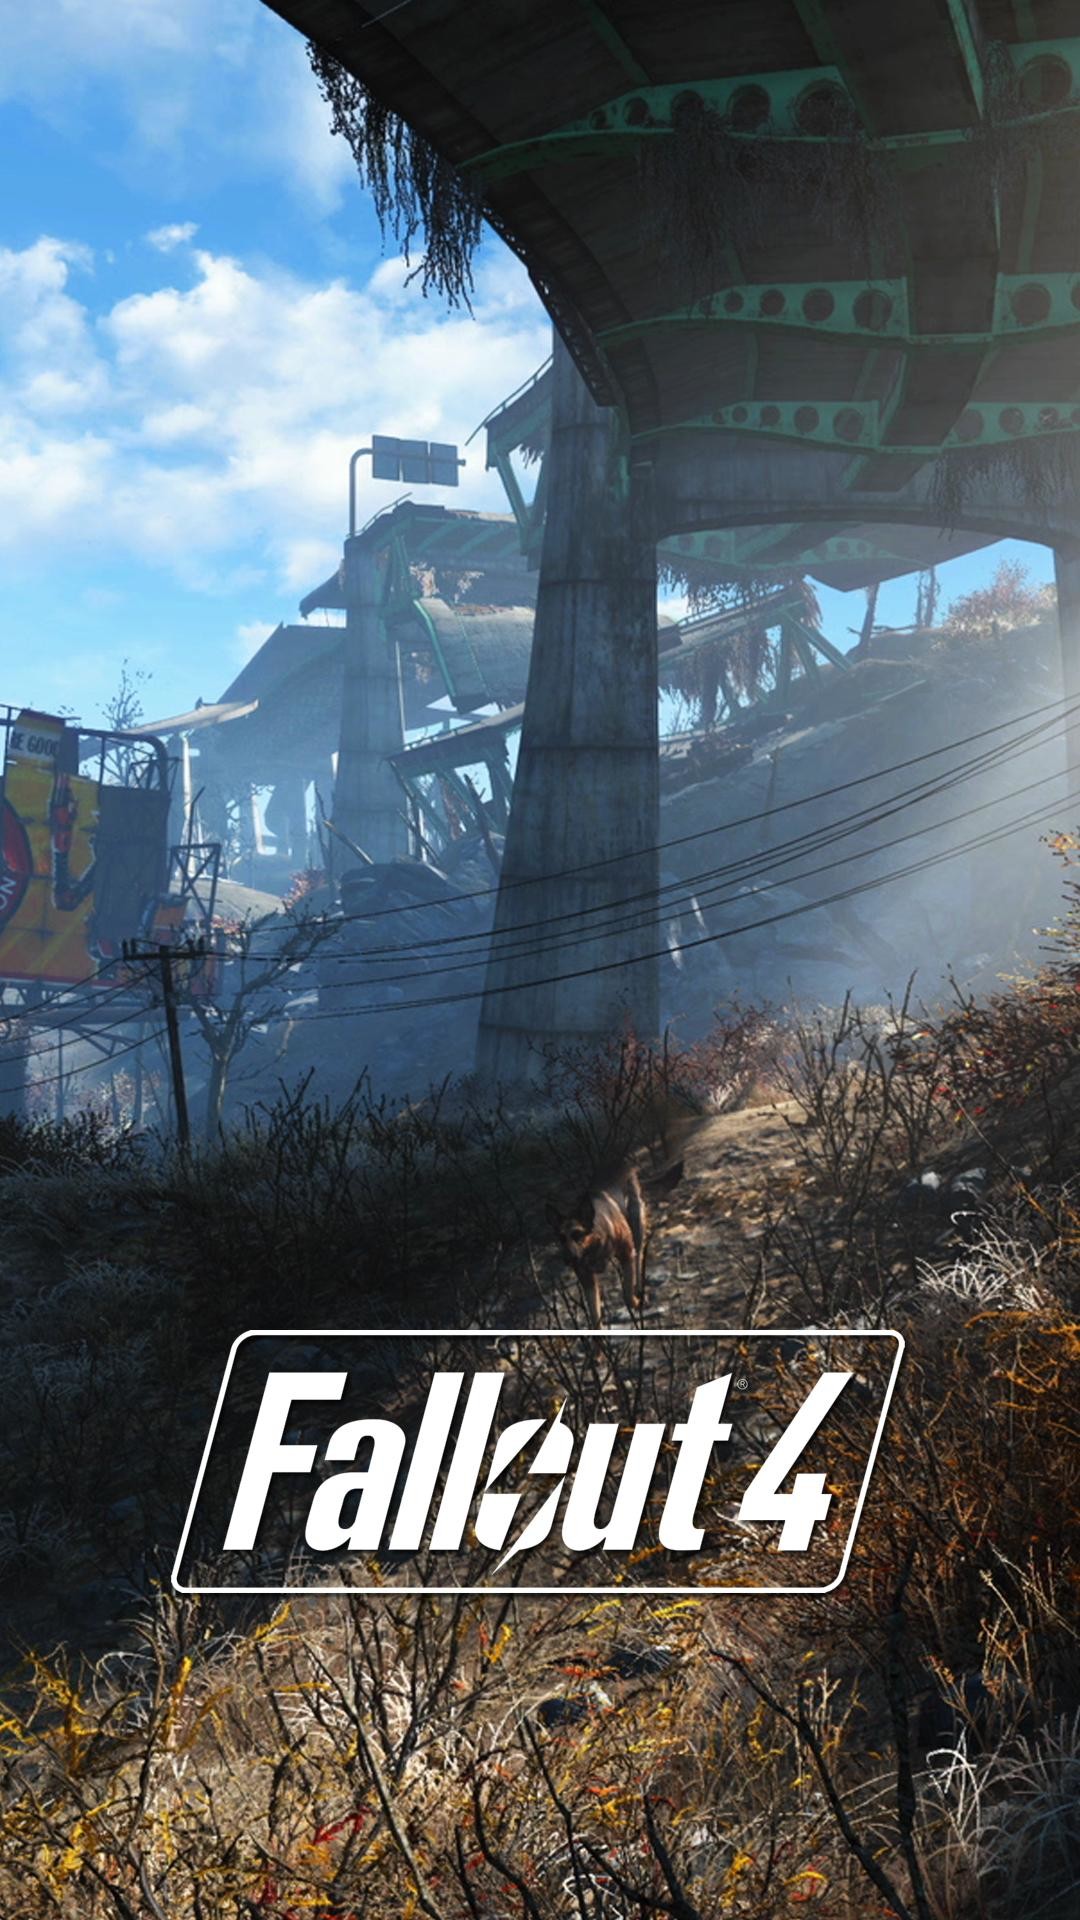 1080x1920 I made some Fallout 4 lock screen wallpapers from E3 stills